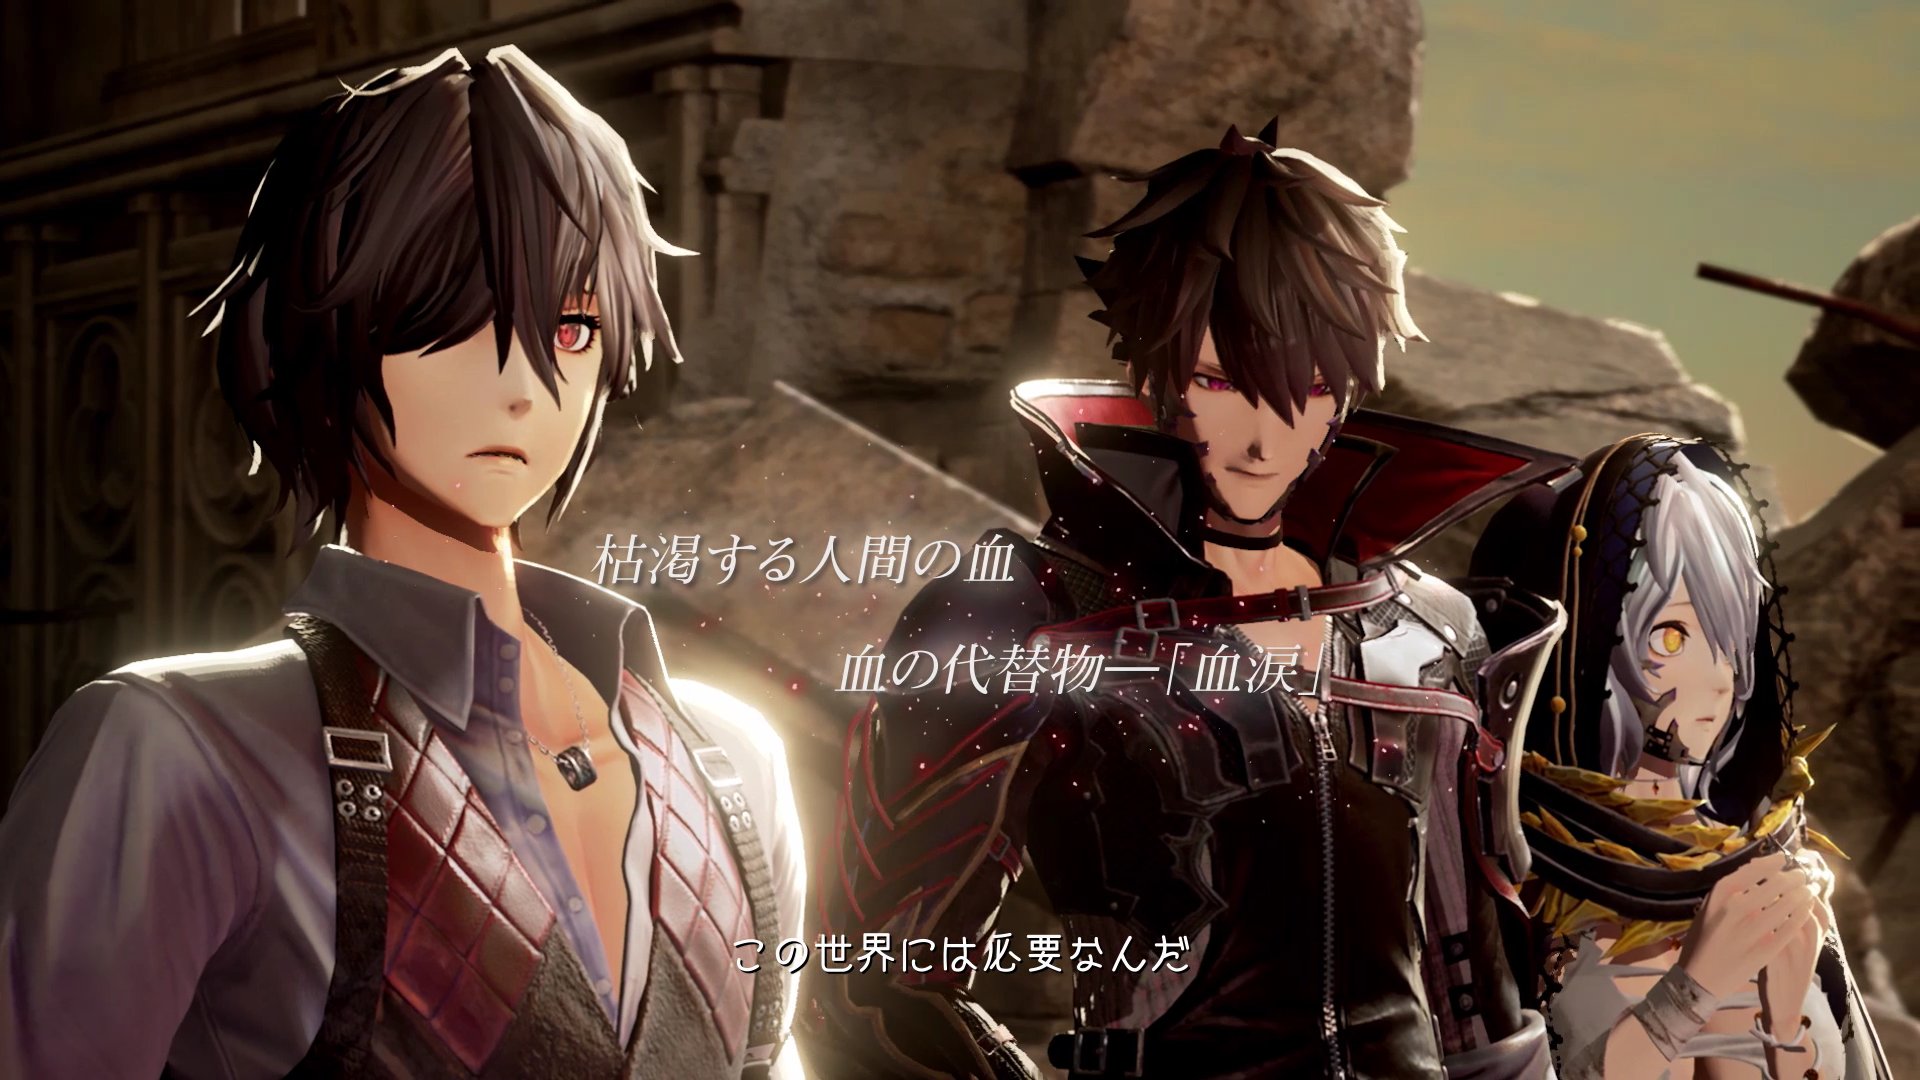 Code Vein - Opening animation unveiling